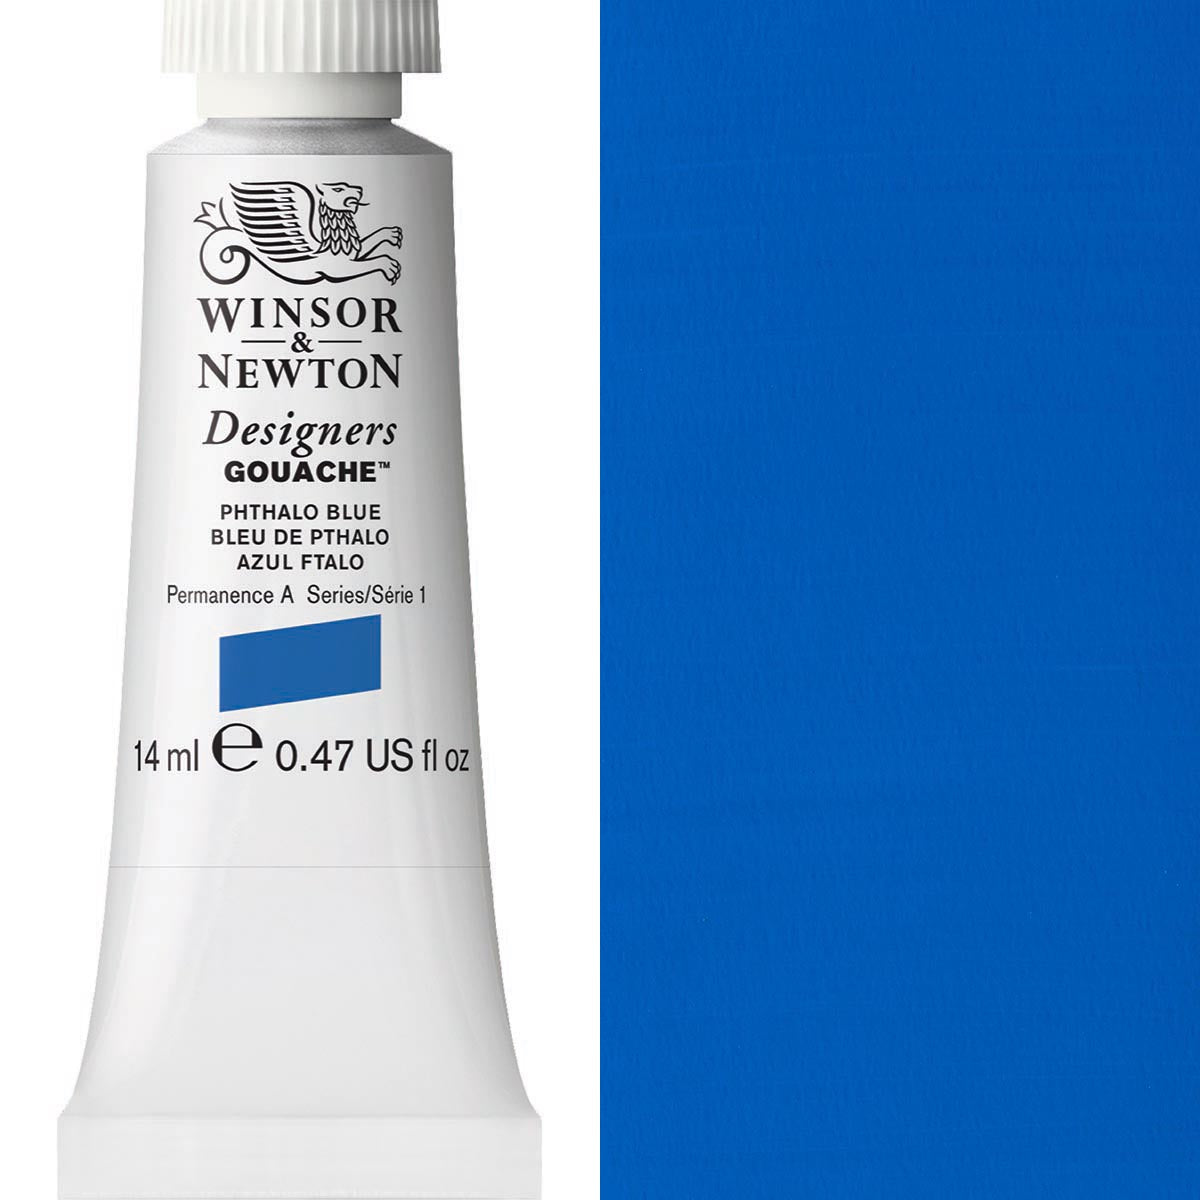 Winsor and Newton - Designers Gouache - 14ml - Phthalo Blue